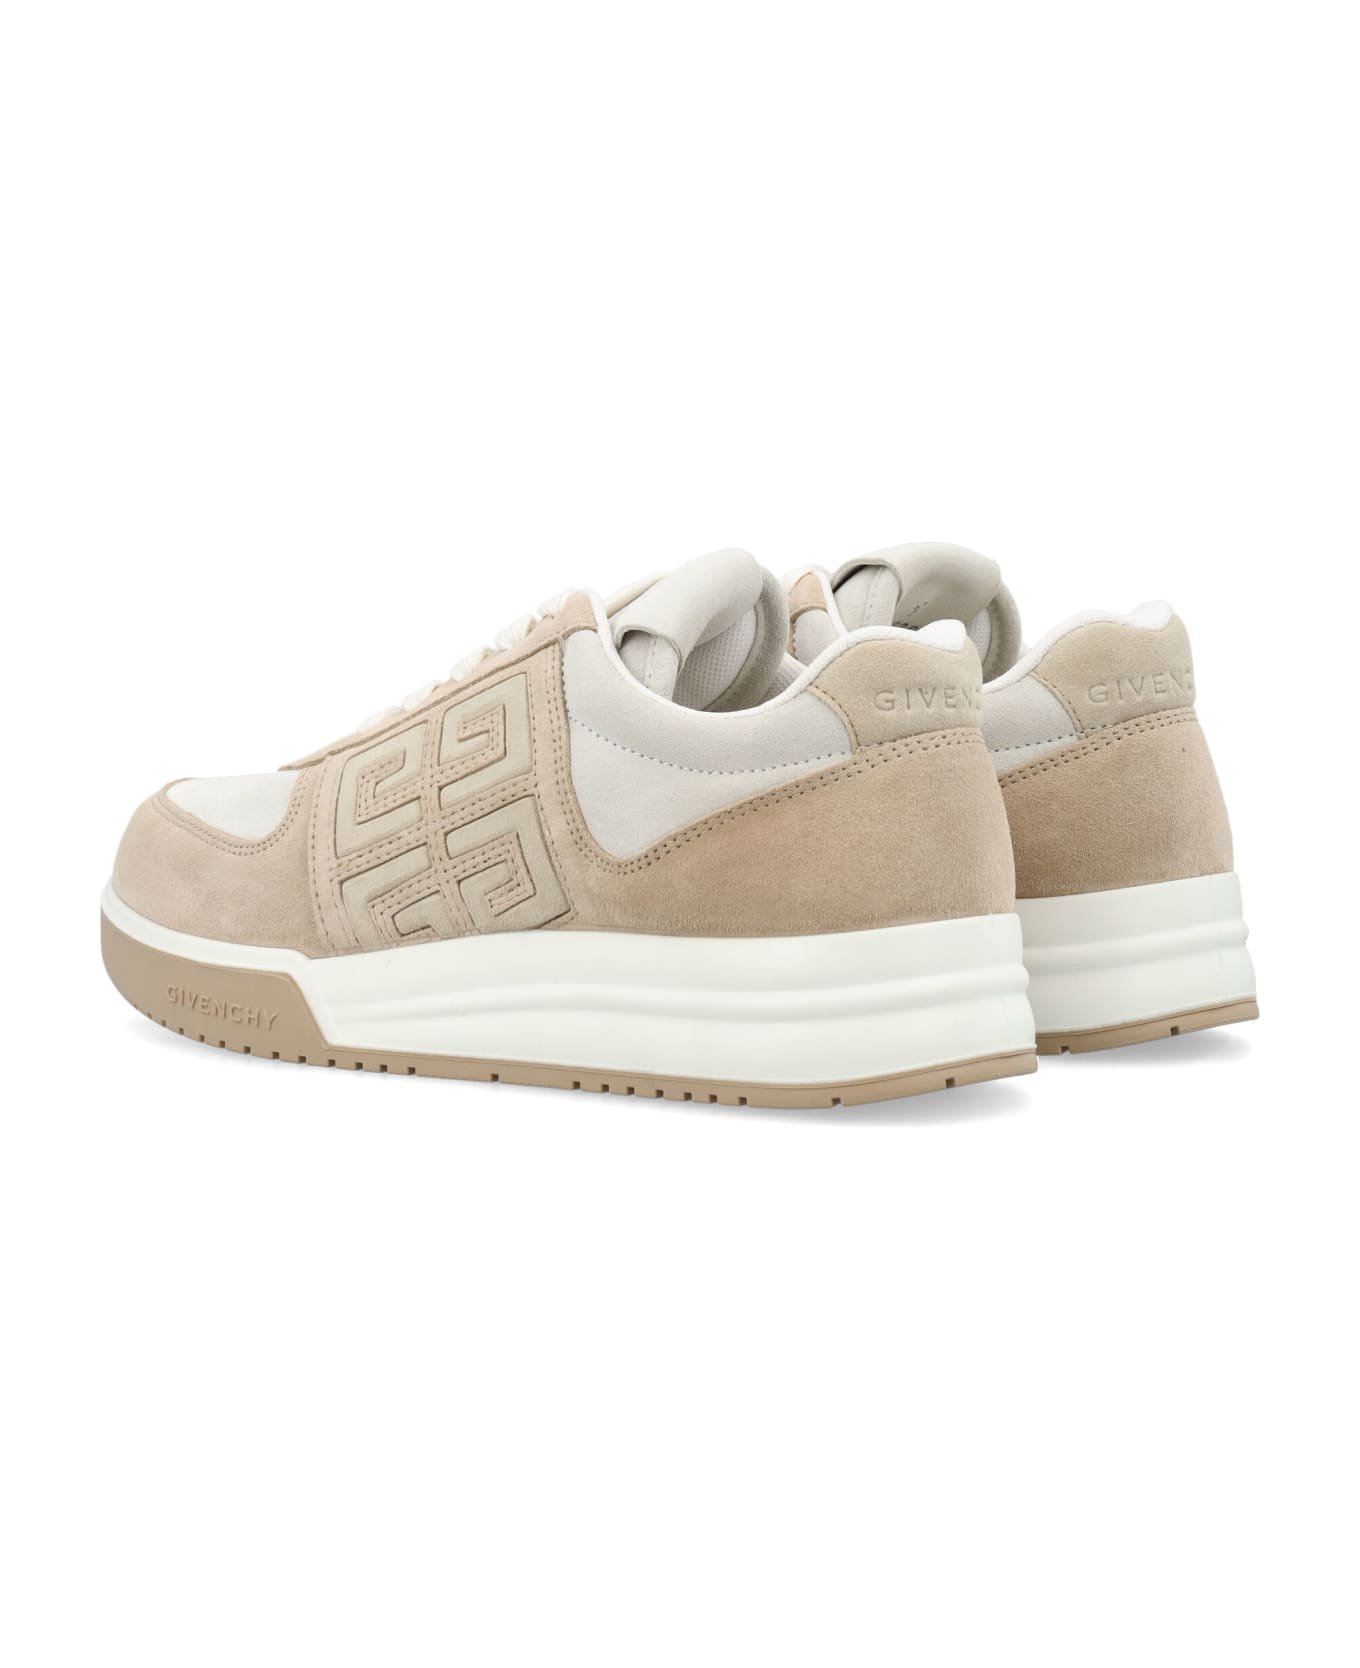 Givenchy G4 Low-top Sneakers - BEIGE/WHITE